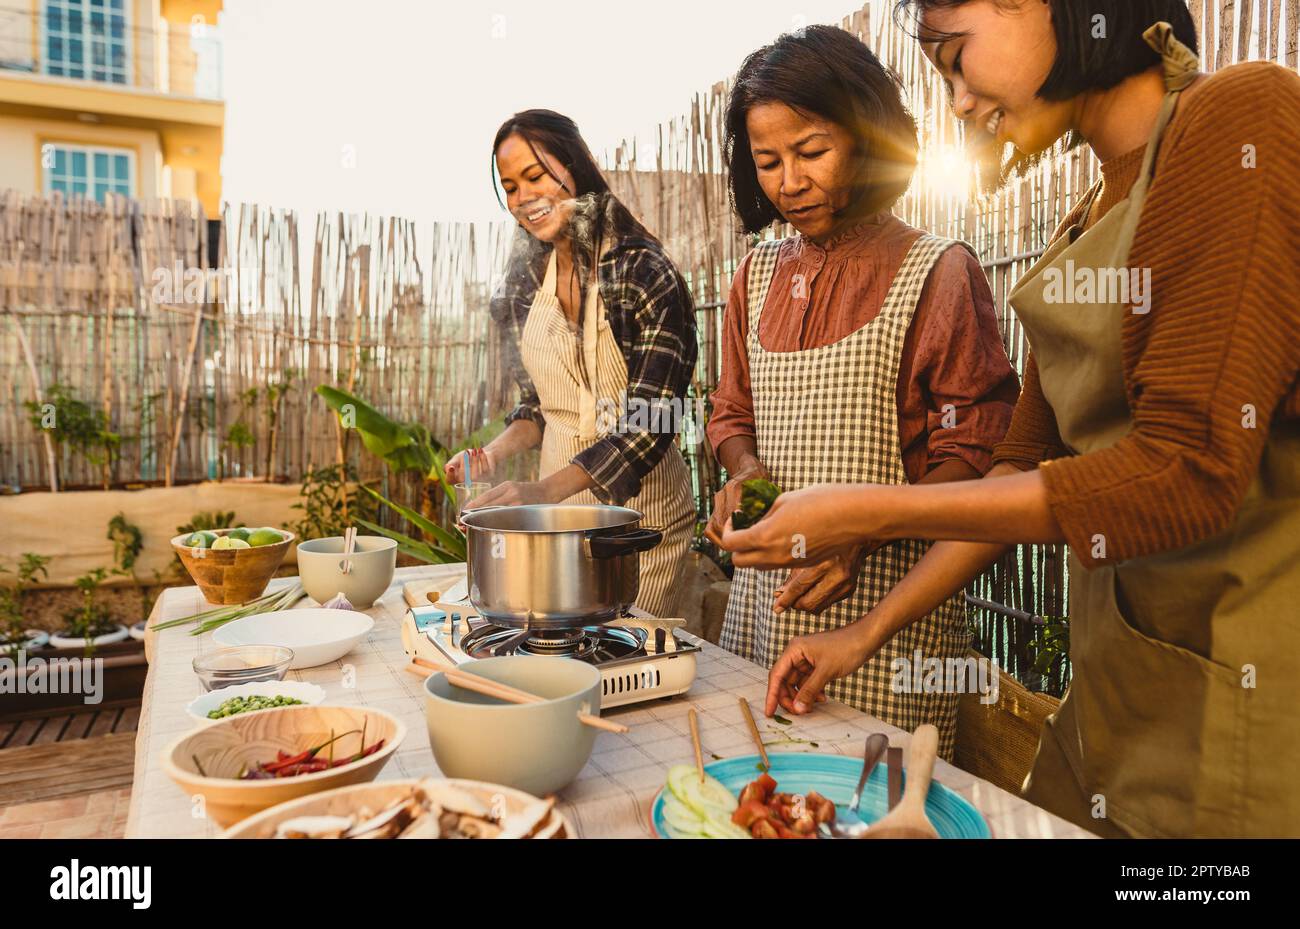 Southeast asian mother with her daughters having fun preparing food recipe together at house patio Stock Photo